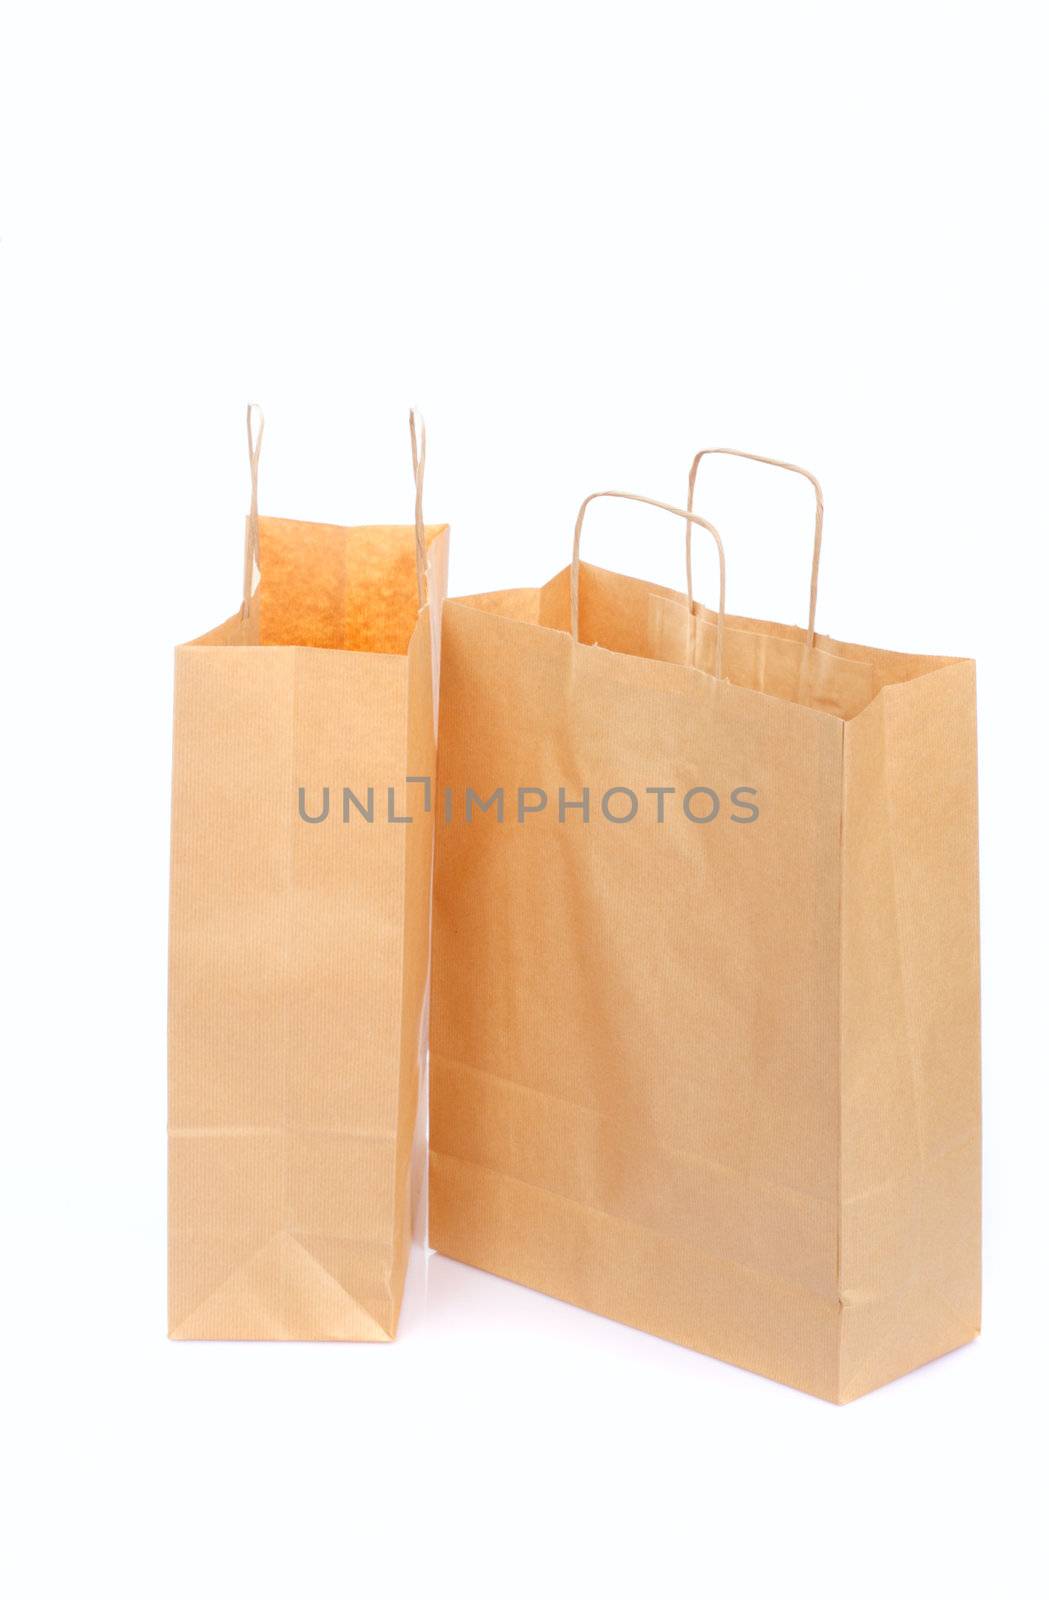 Two Ecological Paper Bags by aguirre_mar